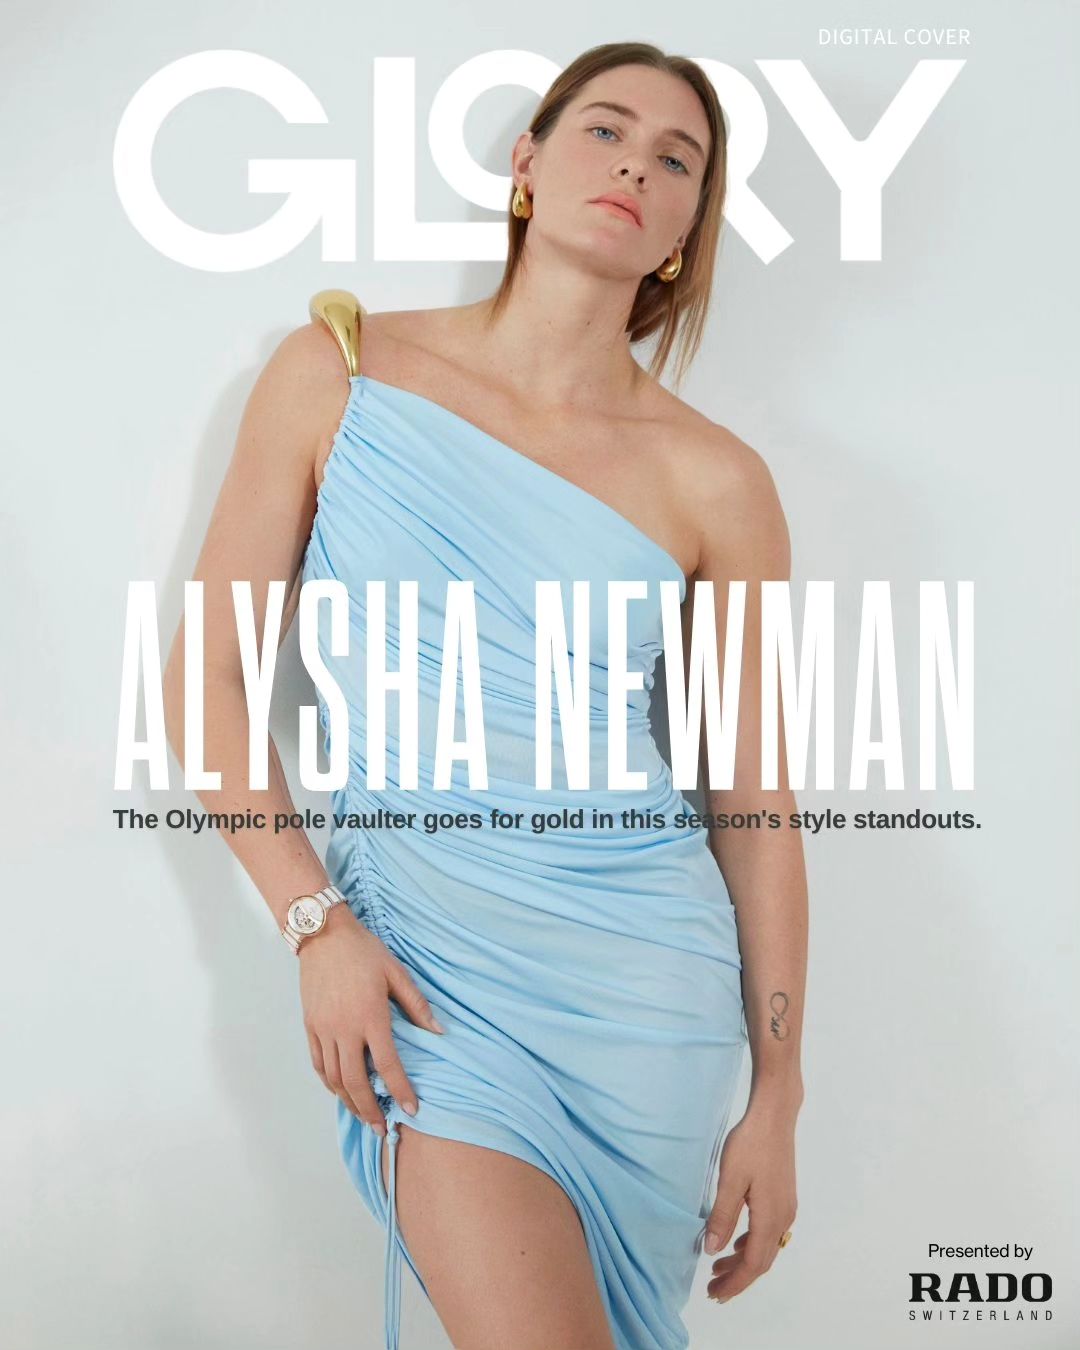 DIGITAL COVER: As Alysha Newman (@alyshanewman) sets her sights on the Paris 2024 Olympics later this summer, she’s not just aiming high; she’s re-envisioning what excellence means to her.⁠
⁠
The Canadian pole vaulter, renowned for her dynamic performances and record-breaking feats, has consistently raised the bar for herself and contemporaries alike. In many ways, her journey to the Olympic podium has been a journey of self-discovery, discipline, and focus despite the distractions and injuries that have come up along the way. ⁠
⁠
As she packs her bags for Paris later this summer, Newman shares her thoughts on the 2024 Olympics while wearing this season’s style standouts for @GLORYUpgrade.⁠
⁠
Read 'Alysha Newman is Going for Gold in Paris 2024' on glory.media (link in bio), presented by @Rado. ⁠
⁠
@AlyshaNewman for @GloryUpgrade⁠
Photography: @satyandpratha⁠
Editor-in-Chief: @mrlancechung⁠
Styling: @sheahurley / @plutinogroup⁠
Styling Assistant: Daniel Bartholomew⁠
HMU: @simoneotis / @cadreartists⁠
Video: @ben_botelho @danarocca⁠
Furniture: @Sundaysfurniture⁠
⁠
⁠
⁠
#alyshanewman #paris2024 #parisolympics #Olympics #Olympian #Athletelife #athletemotivation #athletedevelopment #athletemindset #athletementalhealth #athleteoftheweek #athleteforlife #femaleathlete #morethananathlete #Canadianathlete #athleteslife #CanadianOlympian #polevaulter #bottegaveneta #hermes #rado